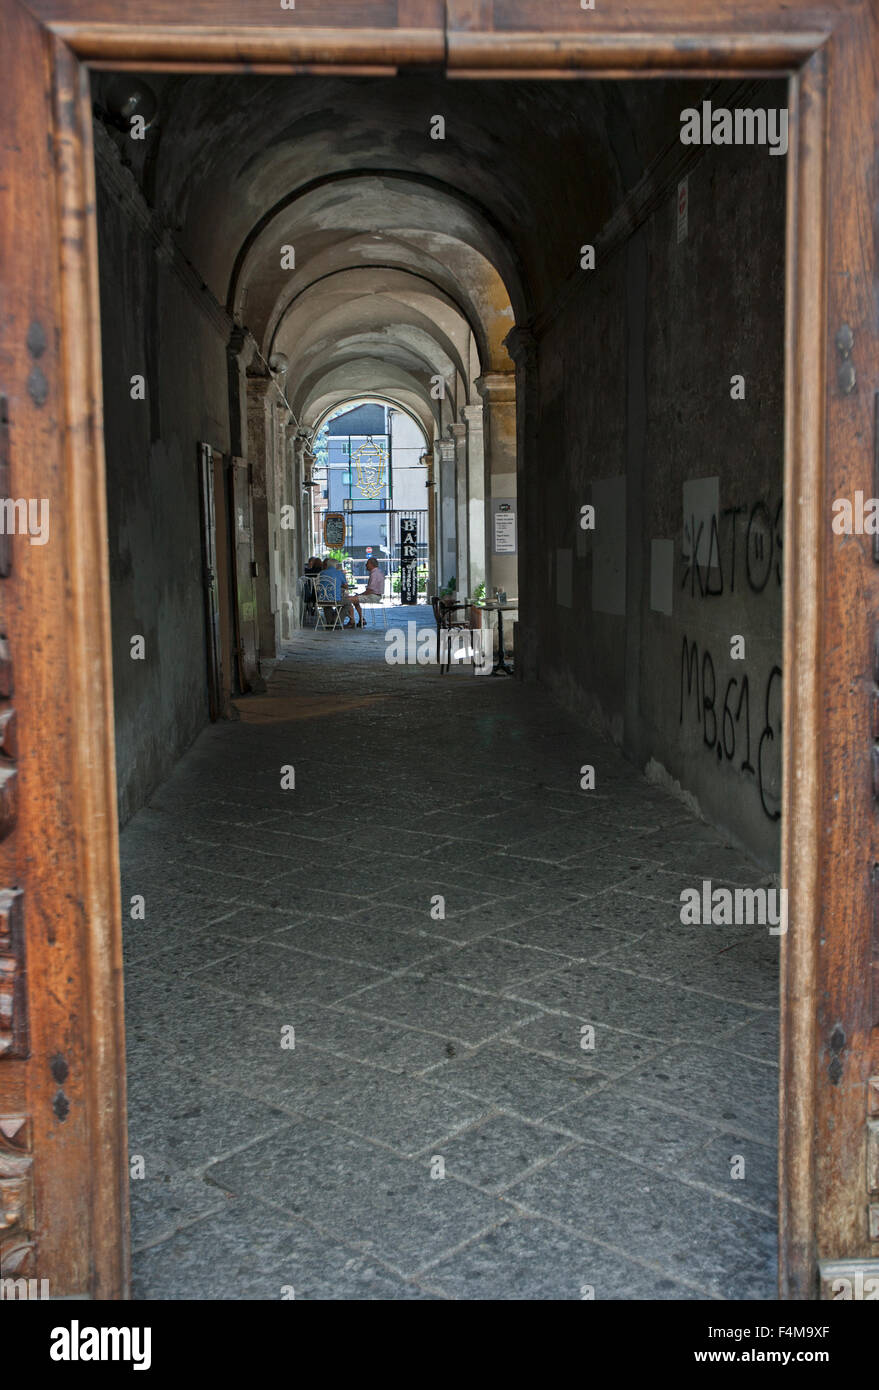 Café Bar in ally, tunnel view, cobble stones, door frame, Florence Italy, Stock Photo